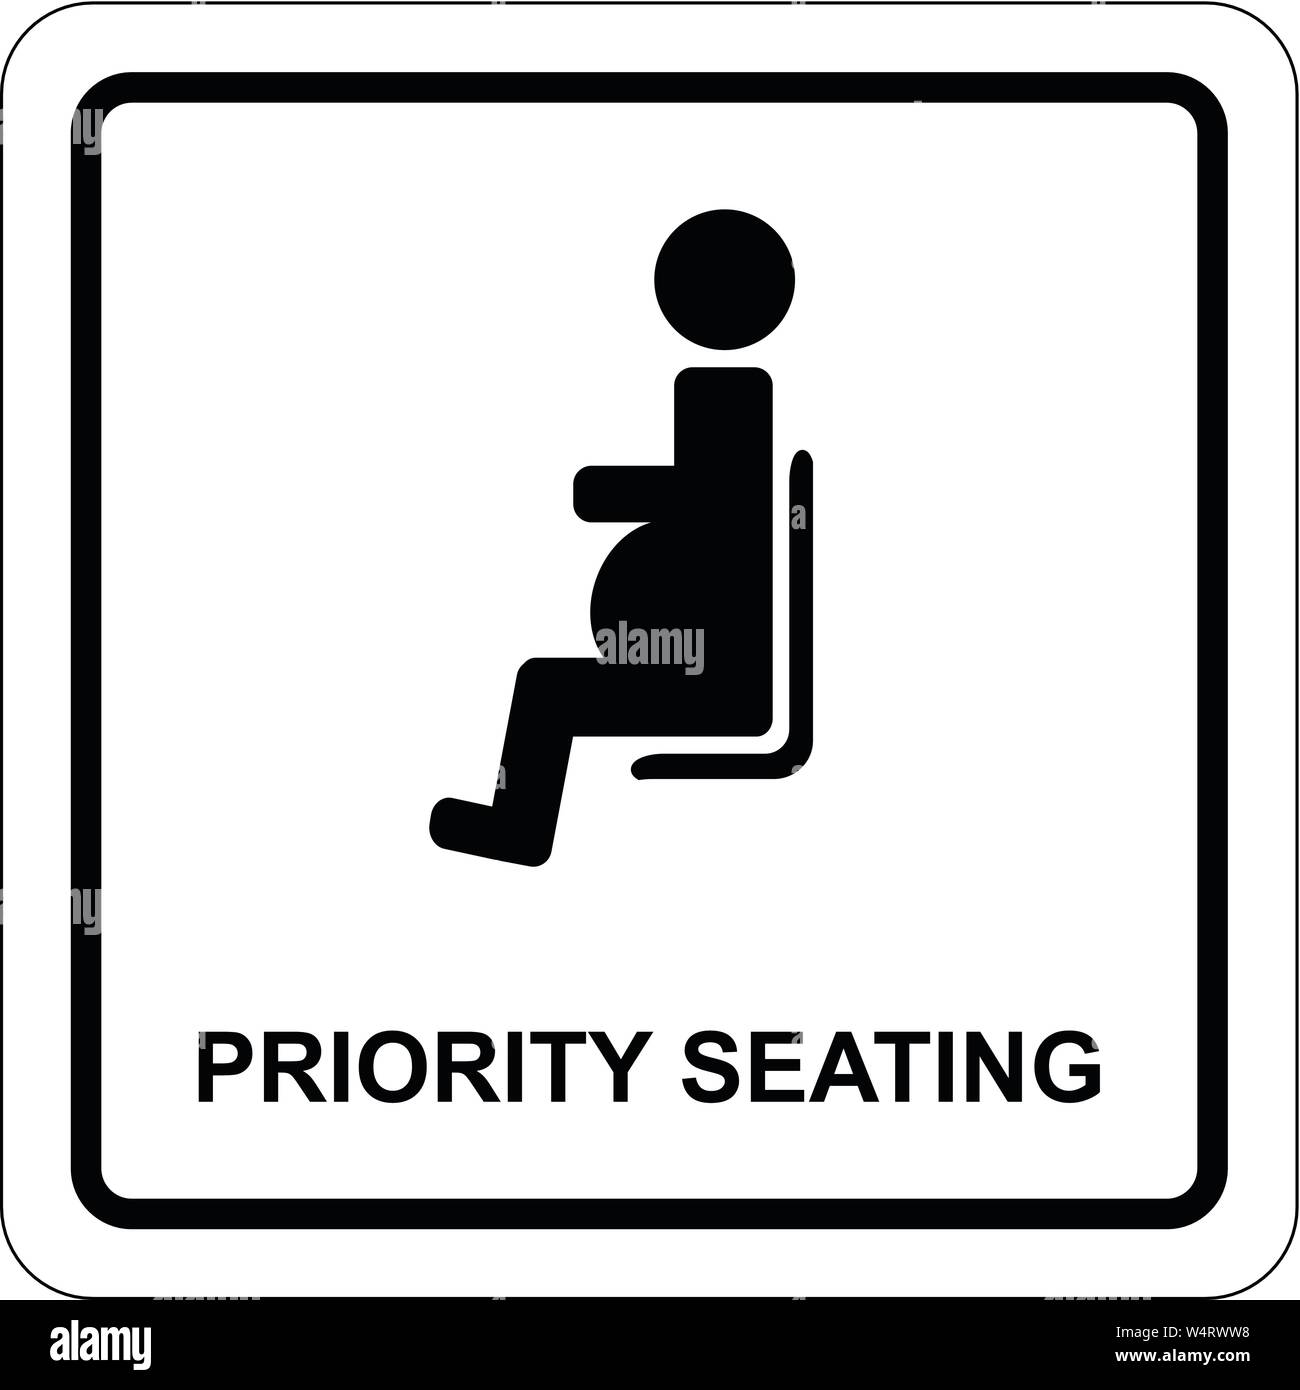 Priority seating for pregnant women and children, special place icons Stock Vector